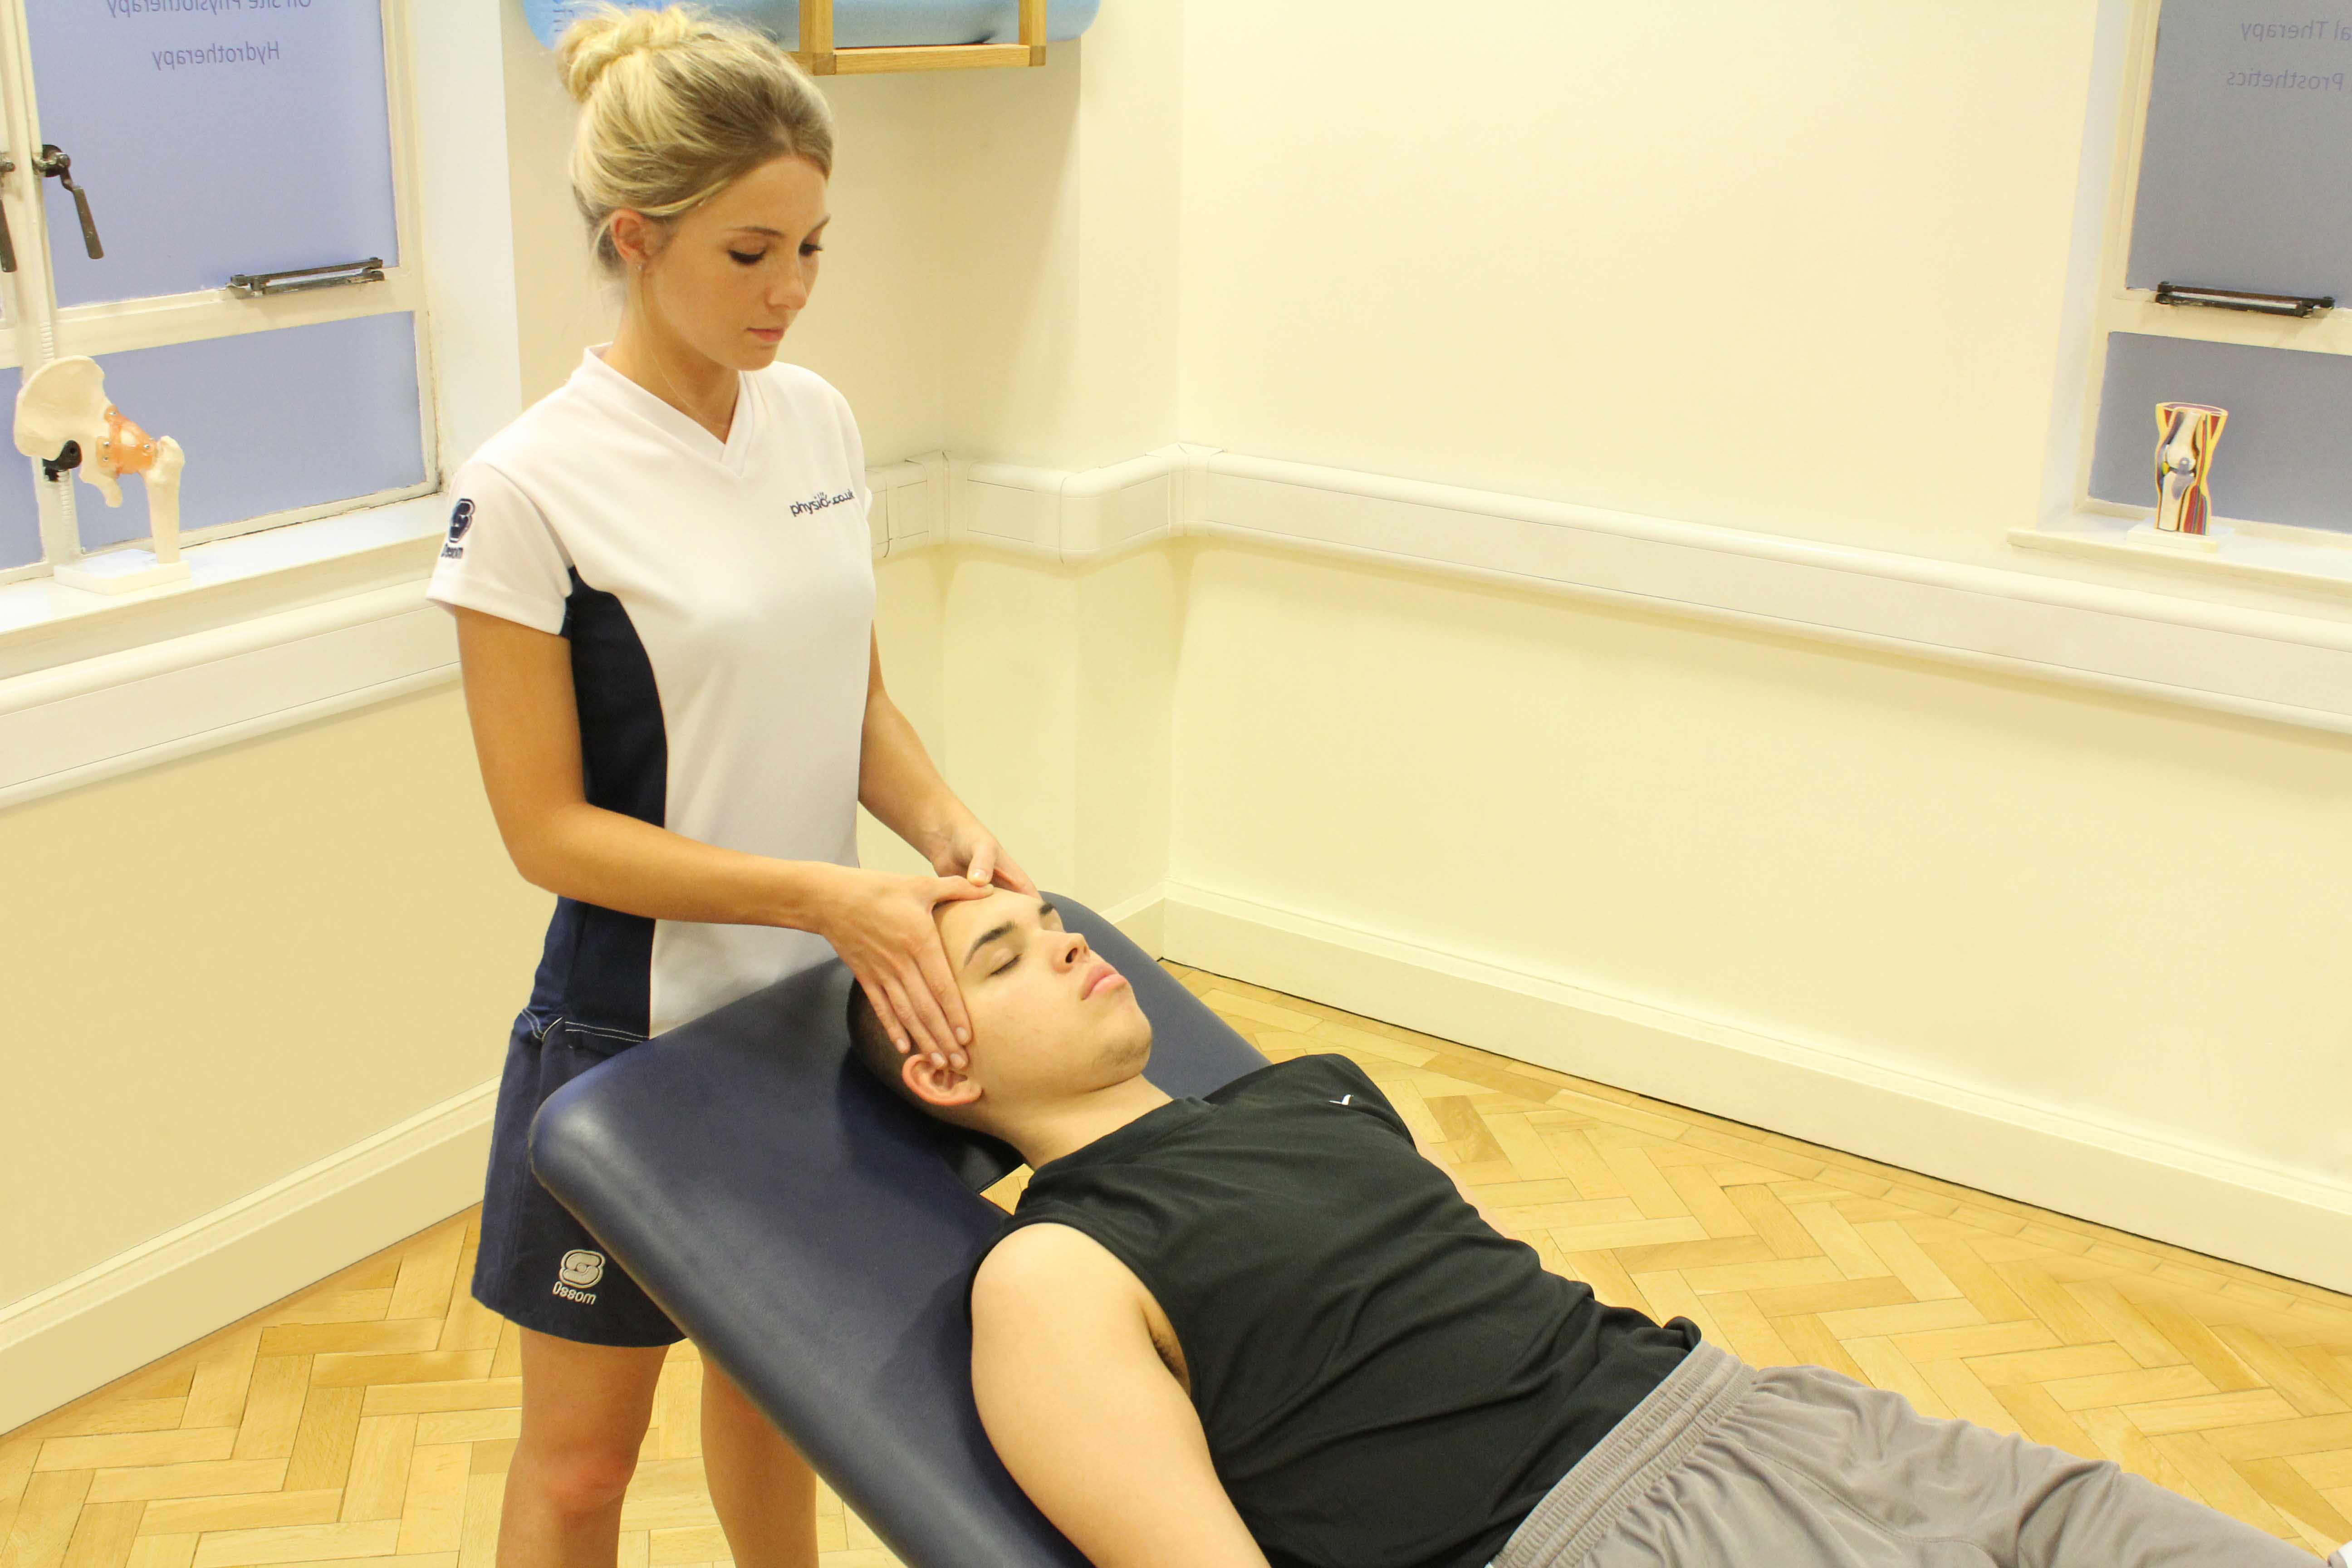 Soft tissue massage of head and face to releive stiffness and stimulate neurological repair